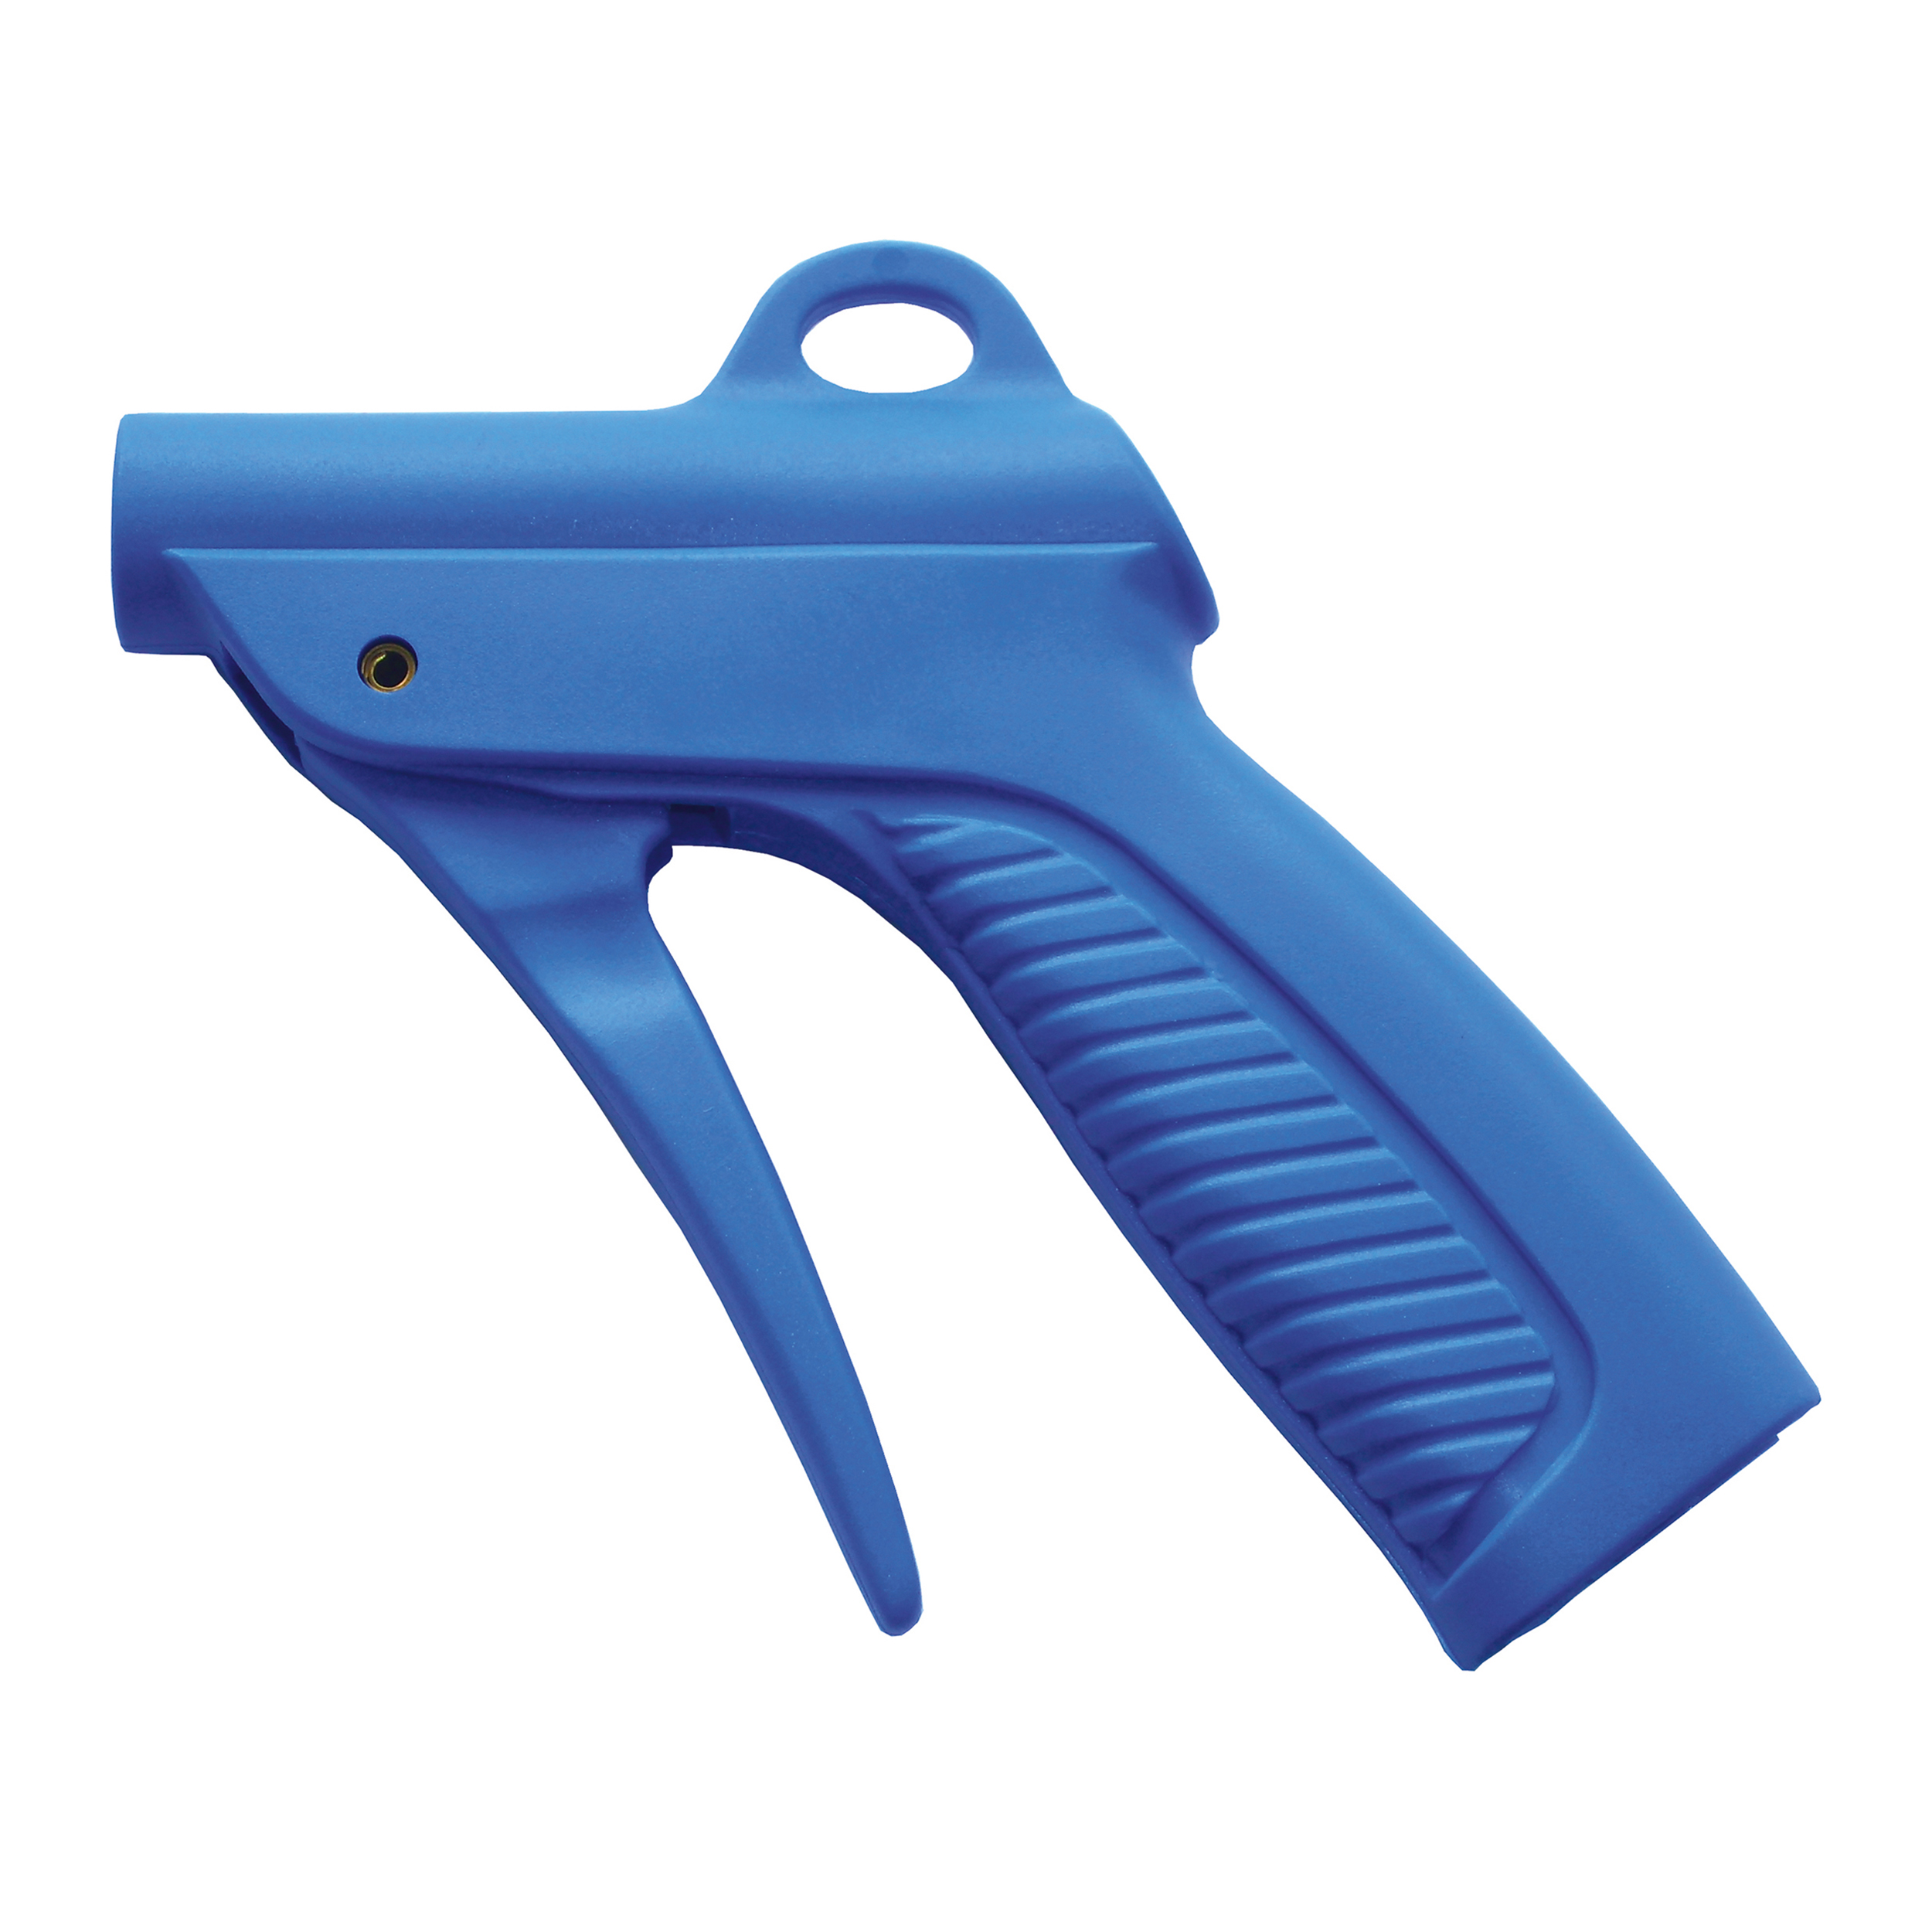 Blow gun, polyamide,controllable flow, inlet: G¼ f, outlet (nozzle): M12 × 1.25, max. operating pressure: 10 bar/145 psi, 150 g